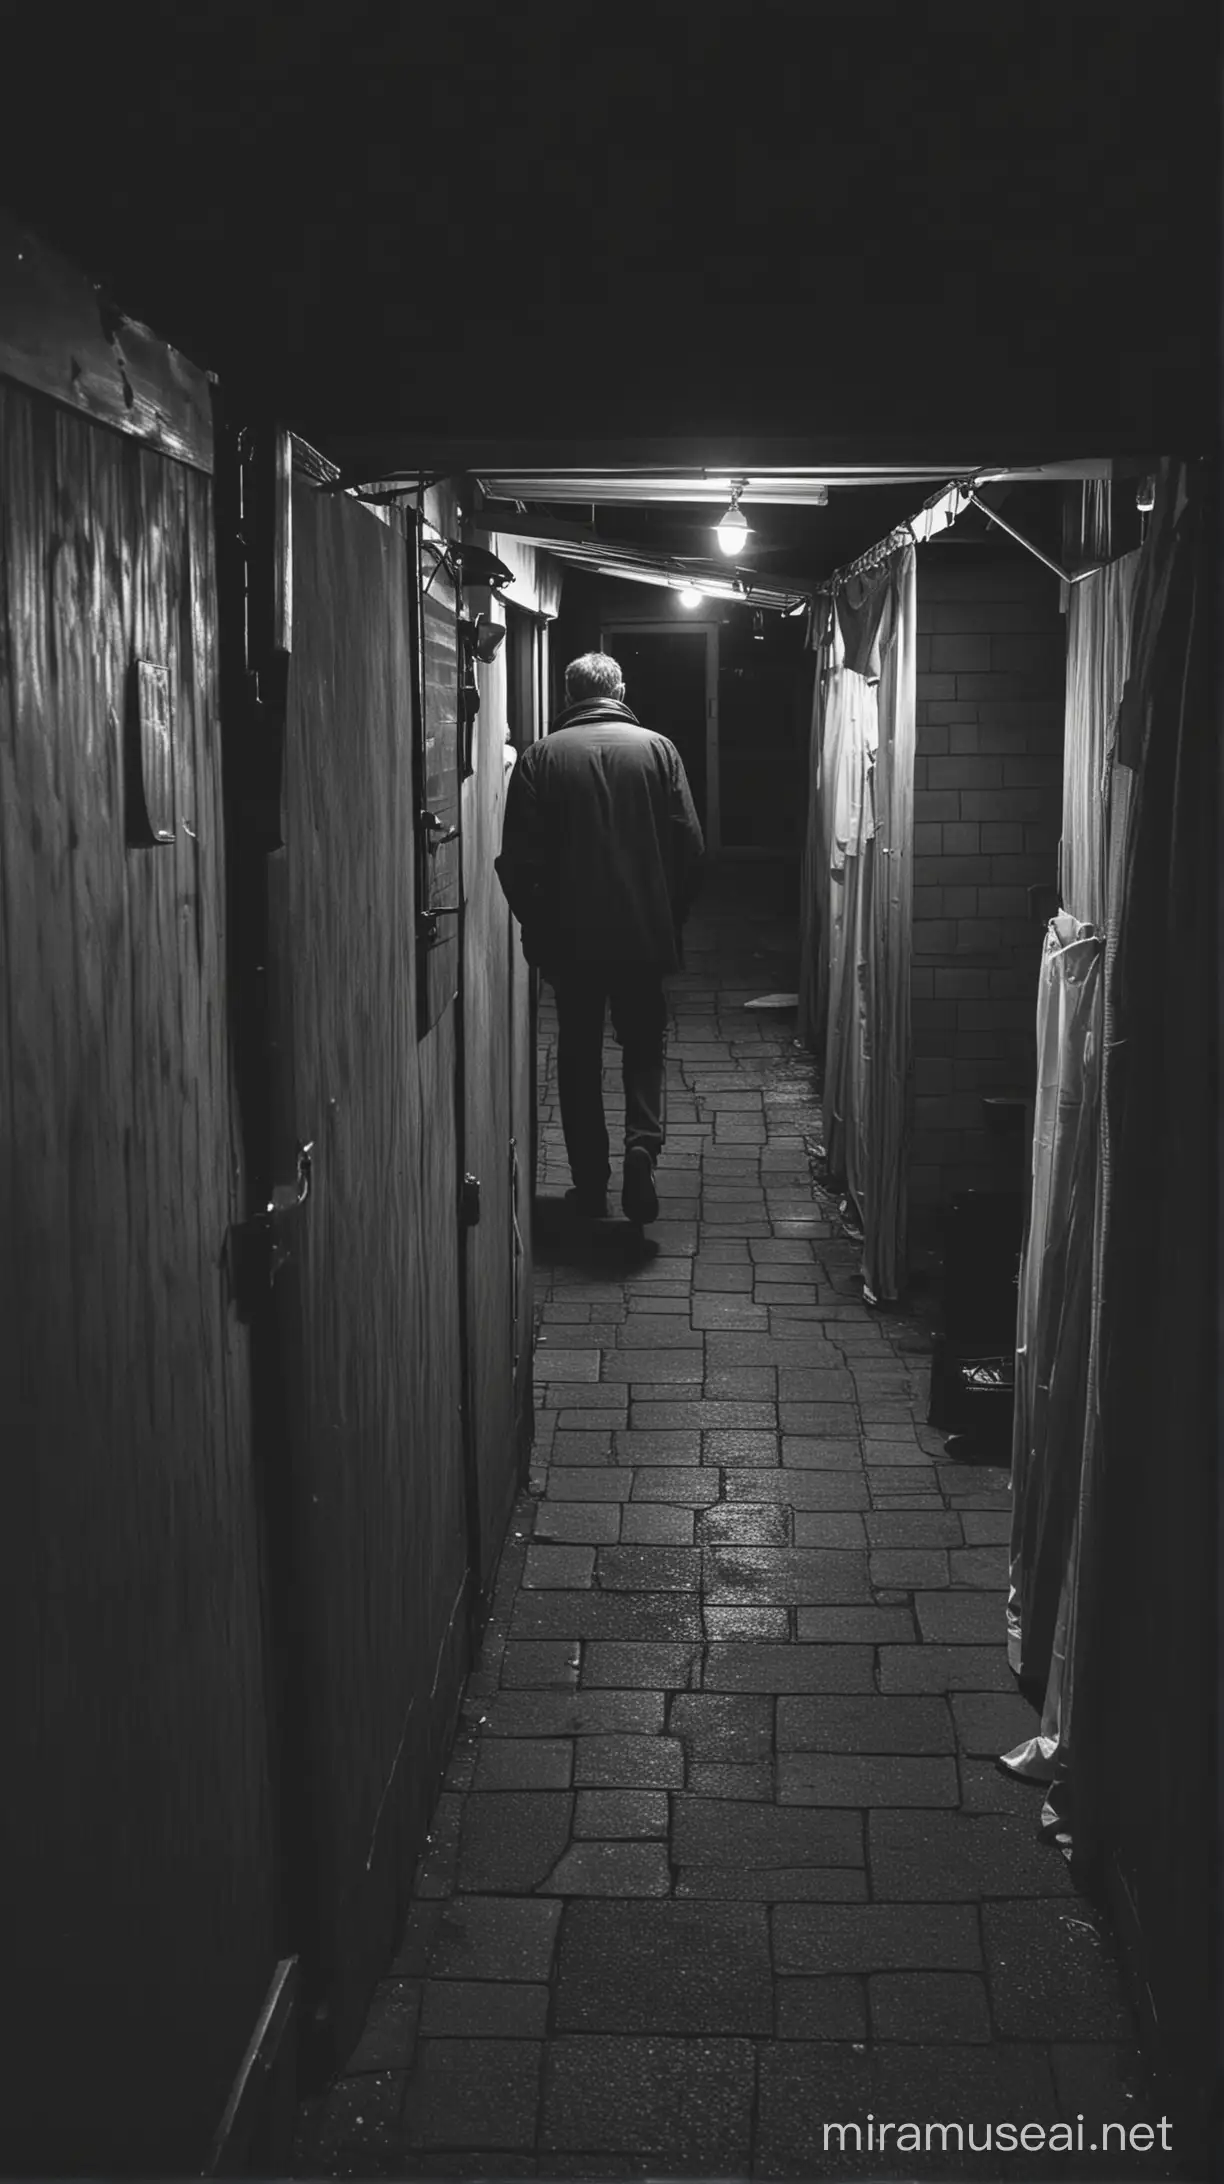 Midnight Market Stall Ambiance with a Father Approaching the Toilet